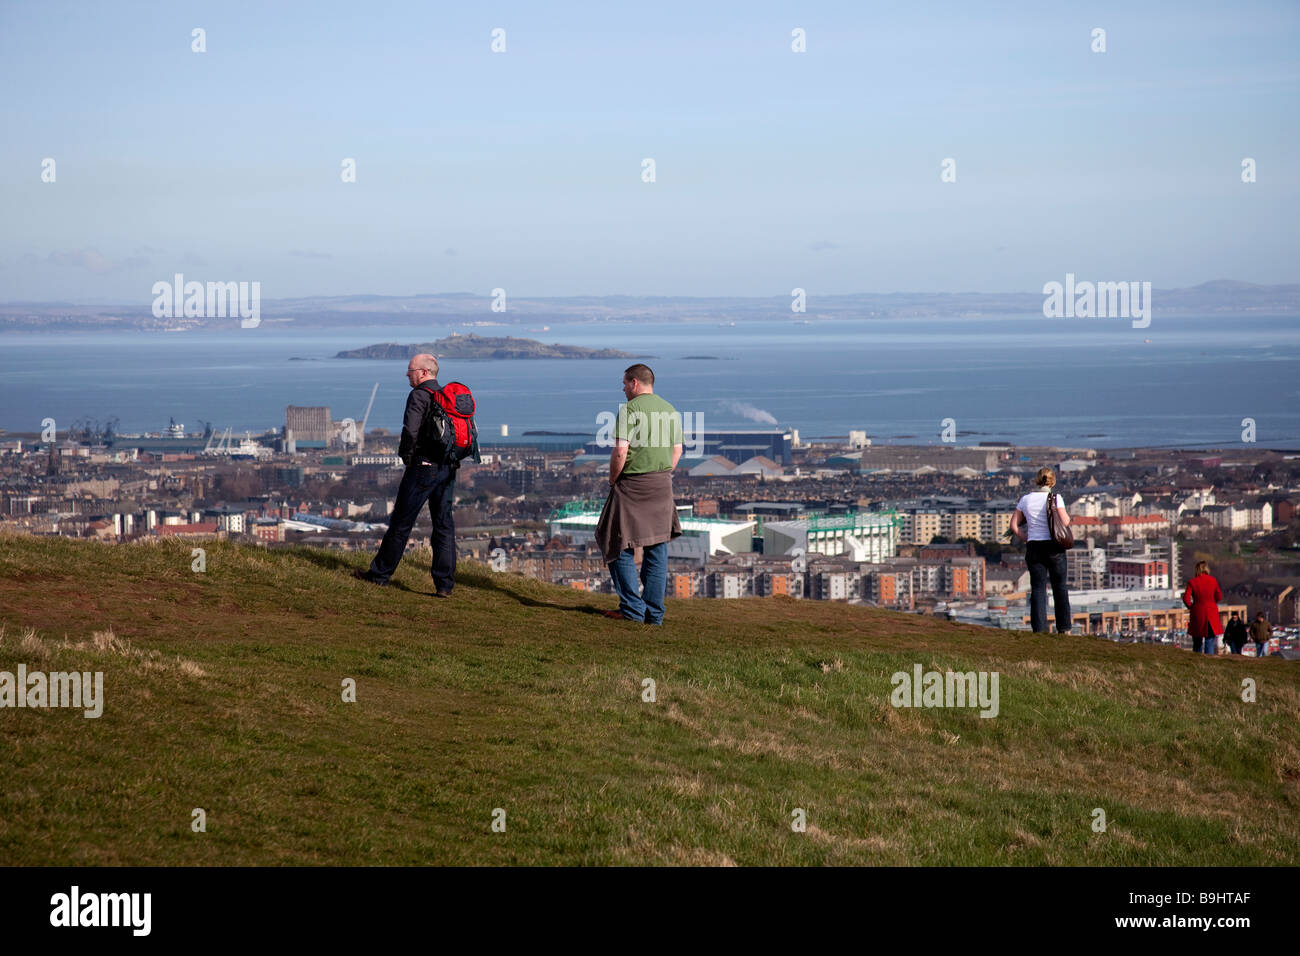 Two Males looking out over the city of Edinburgh Scotland, UK, Europe from above Holyrood Park Stock Photo